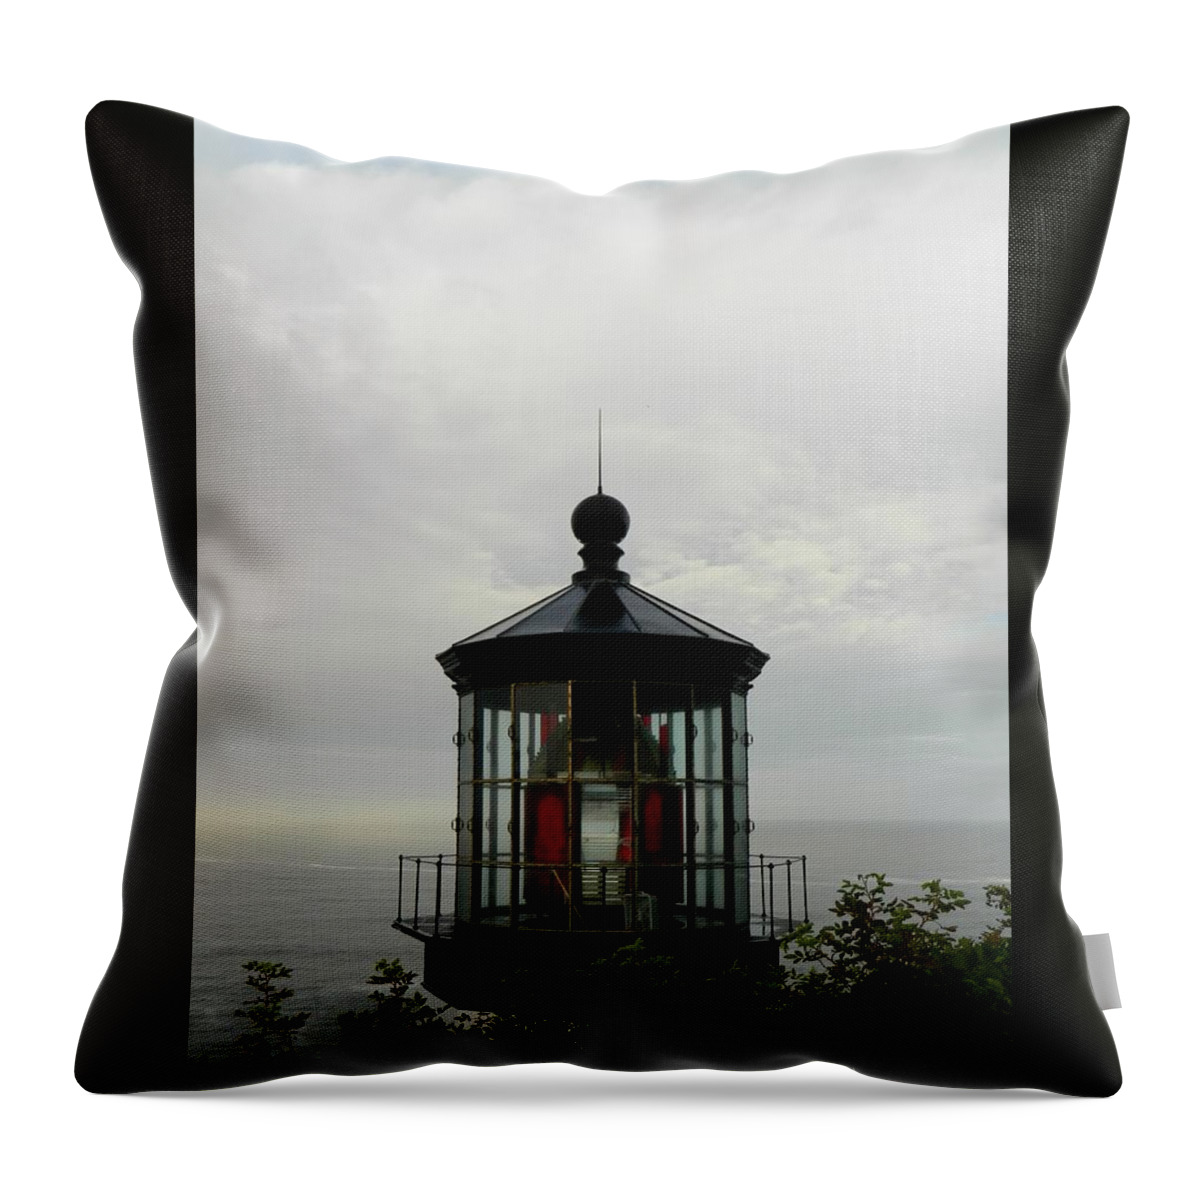 Oregon Throw Pillow featuring the photograph Clouded Morning by Gallery Of Hope 